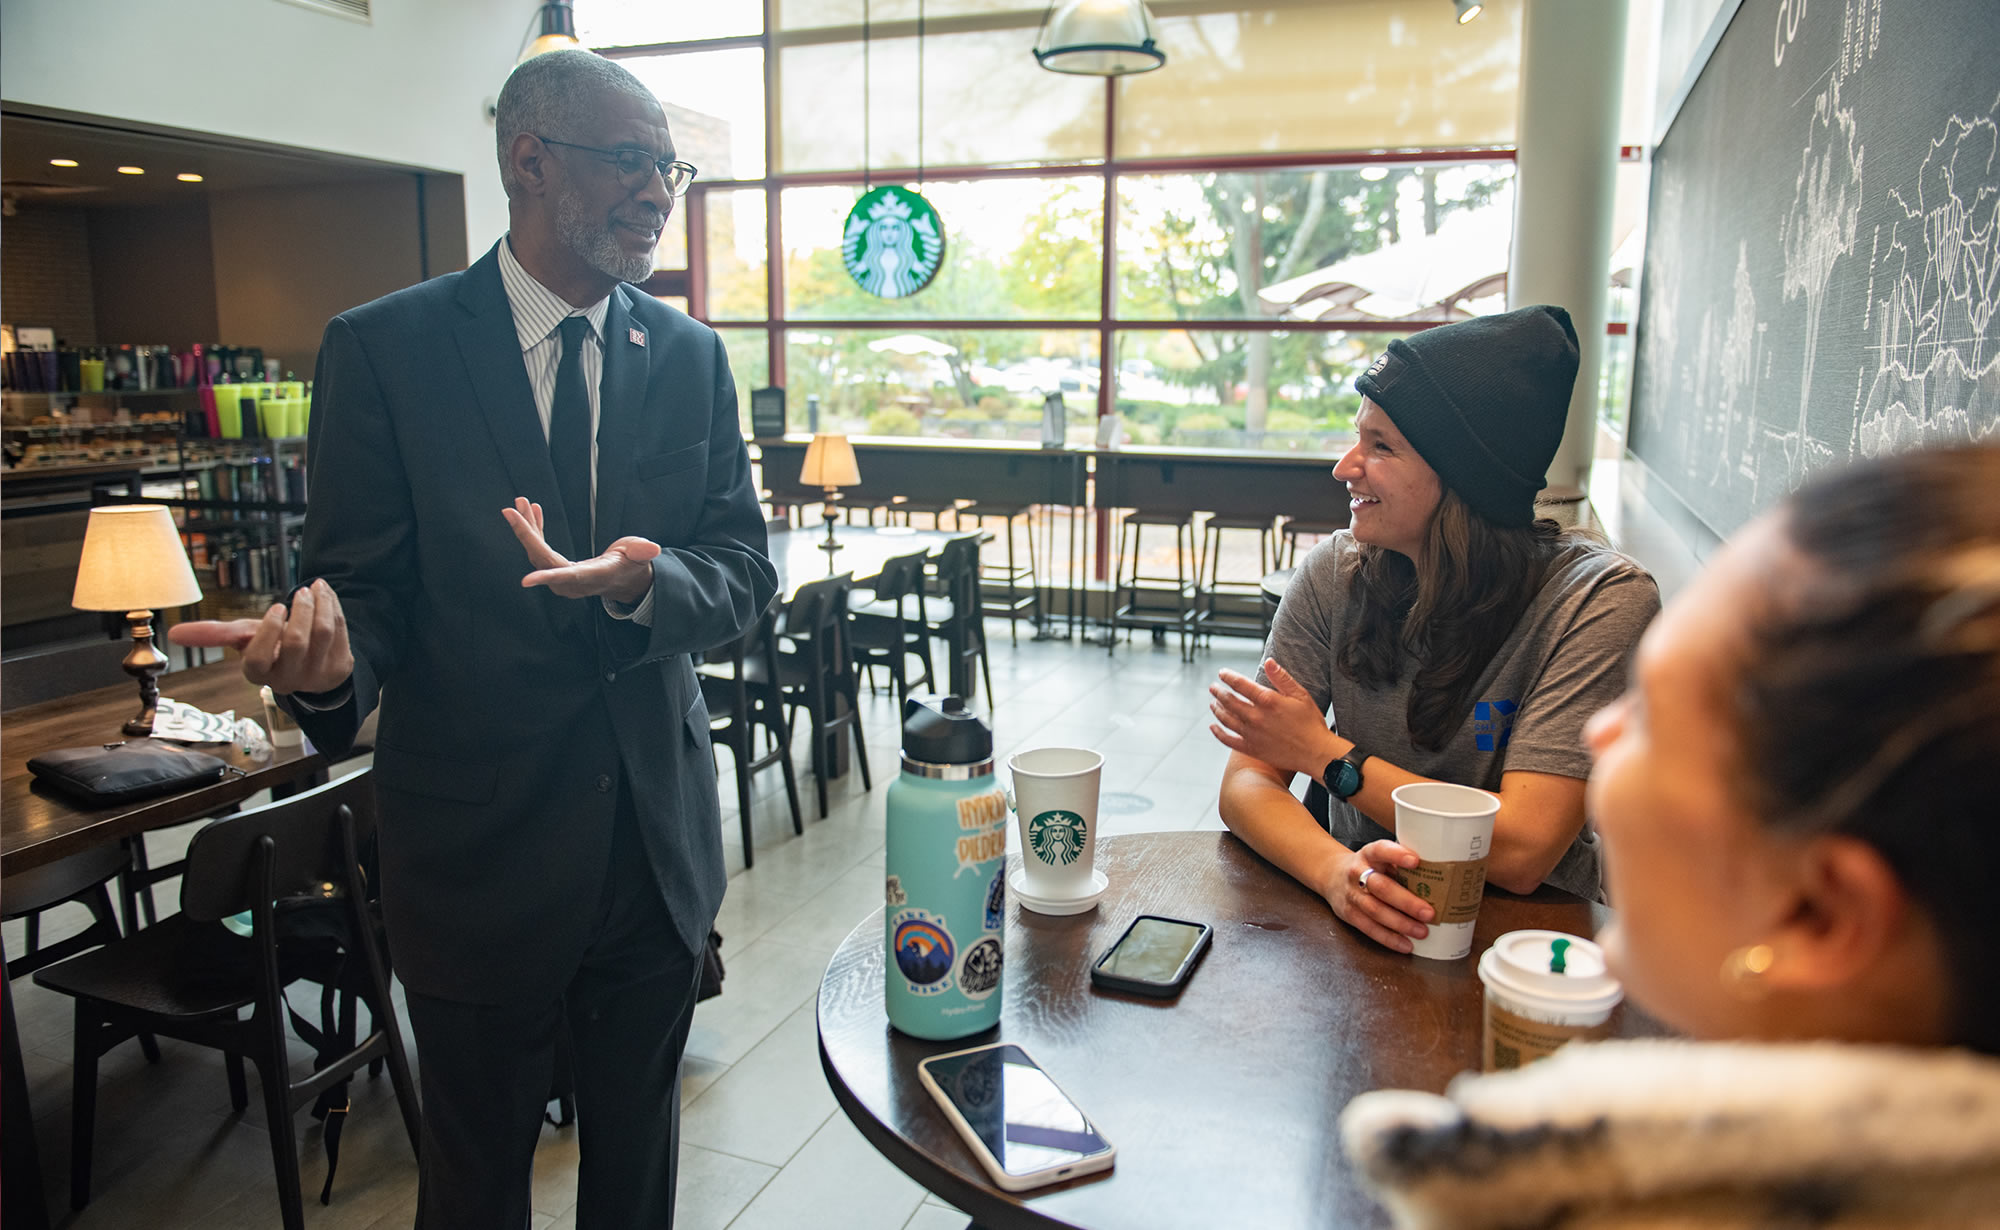 George Grant meeting with students in Starbucks